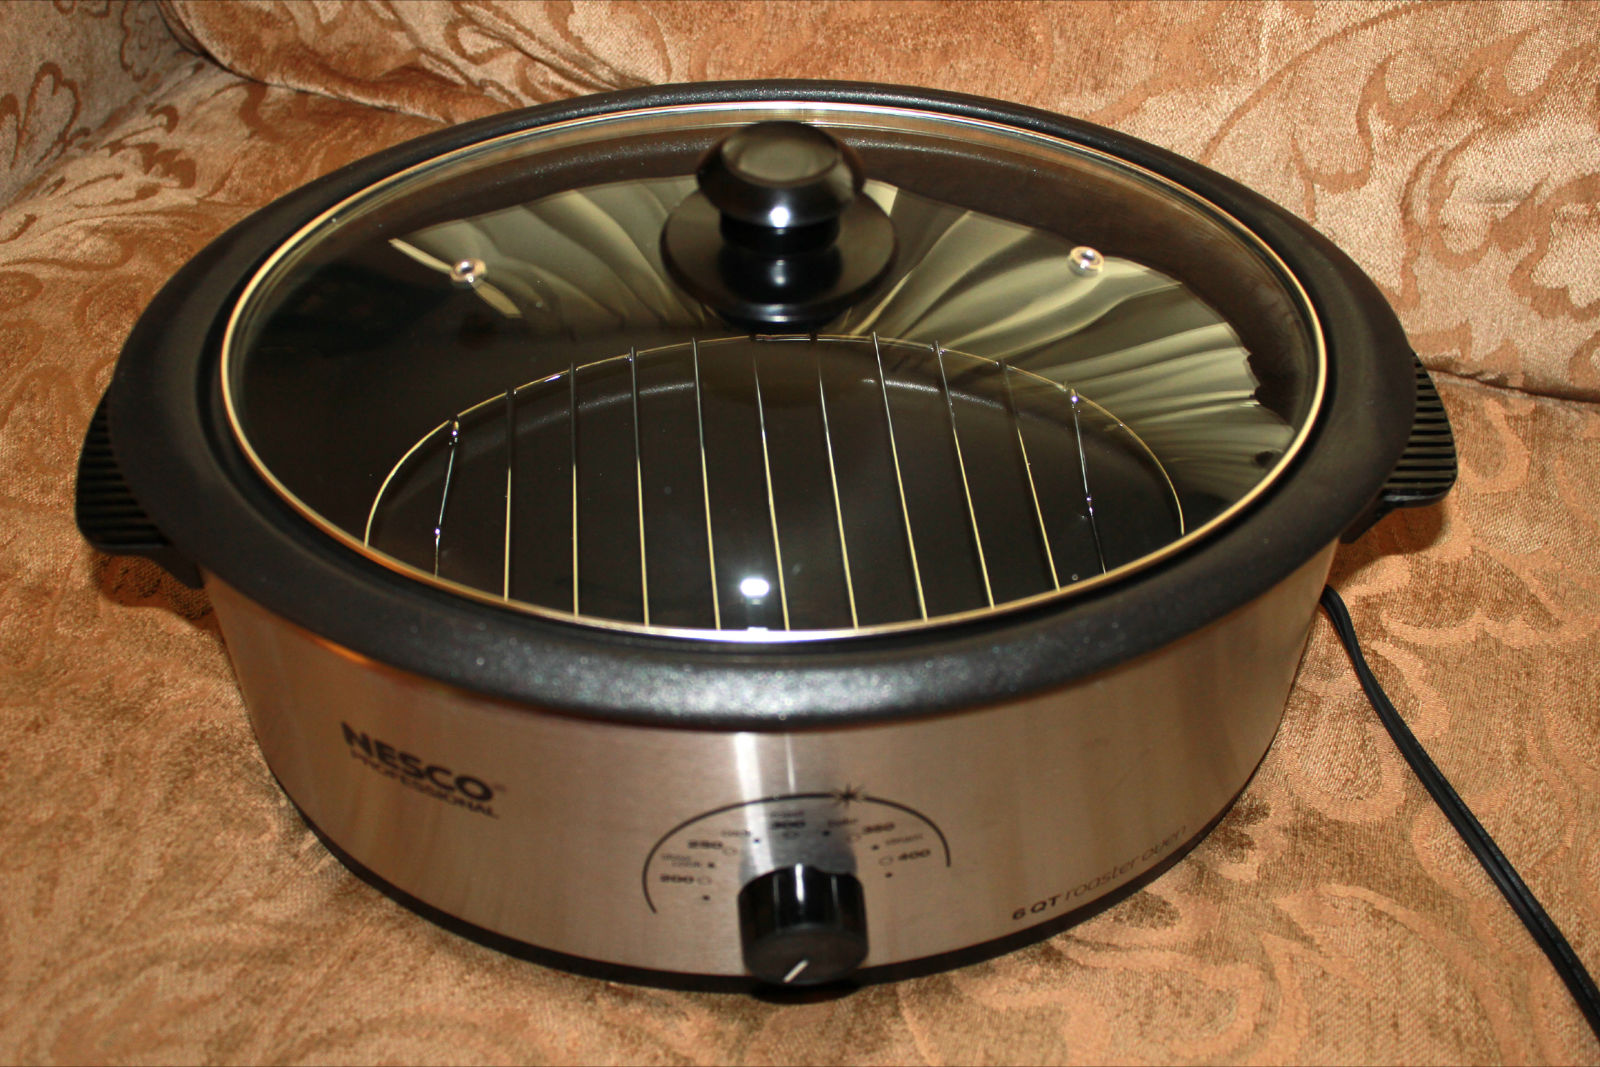 Best Slow Cooker — A Review and Comparison | NESCO Roaster Oven vs Rival Crock Pot